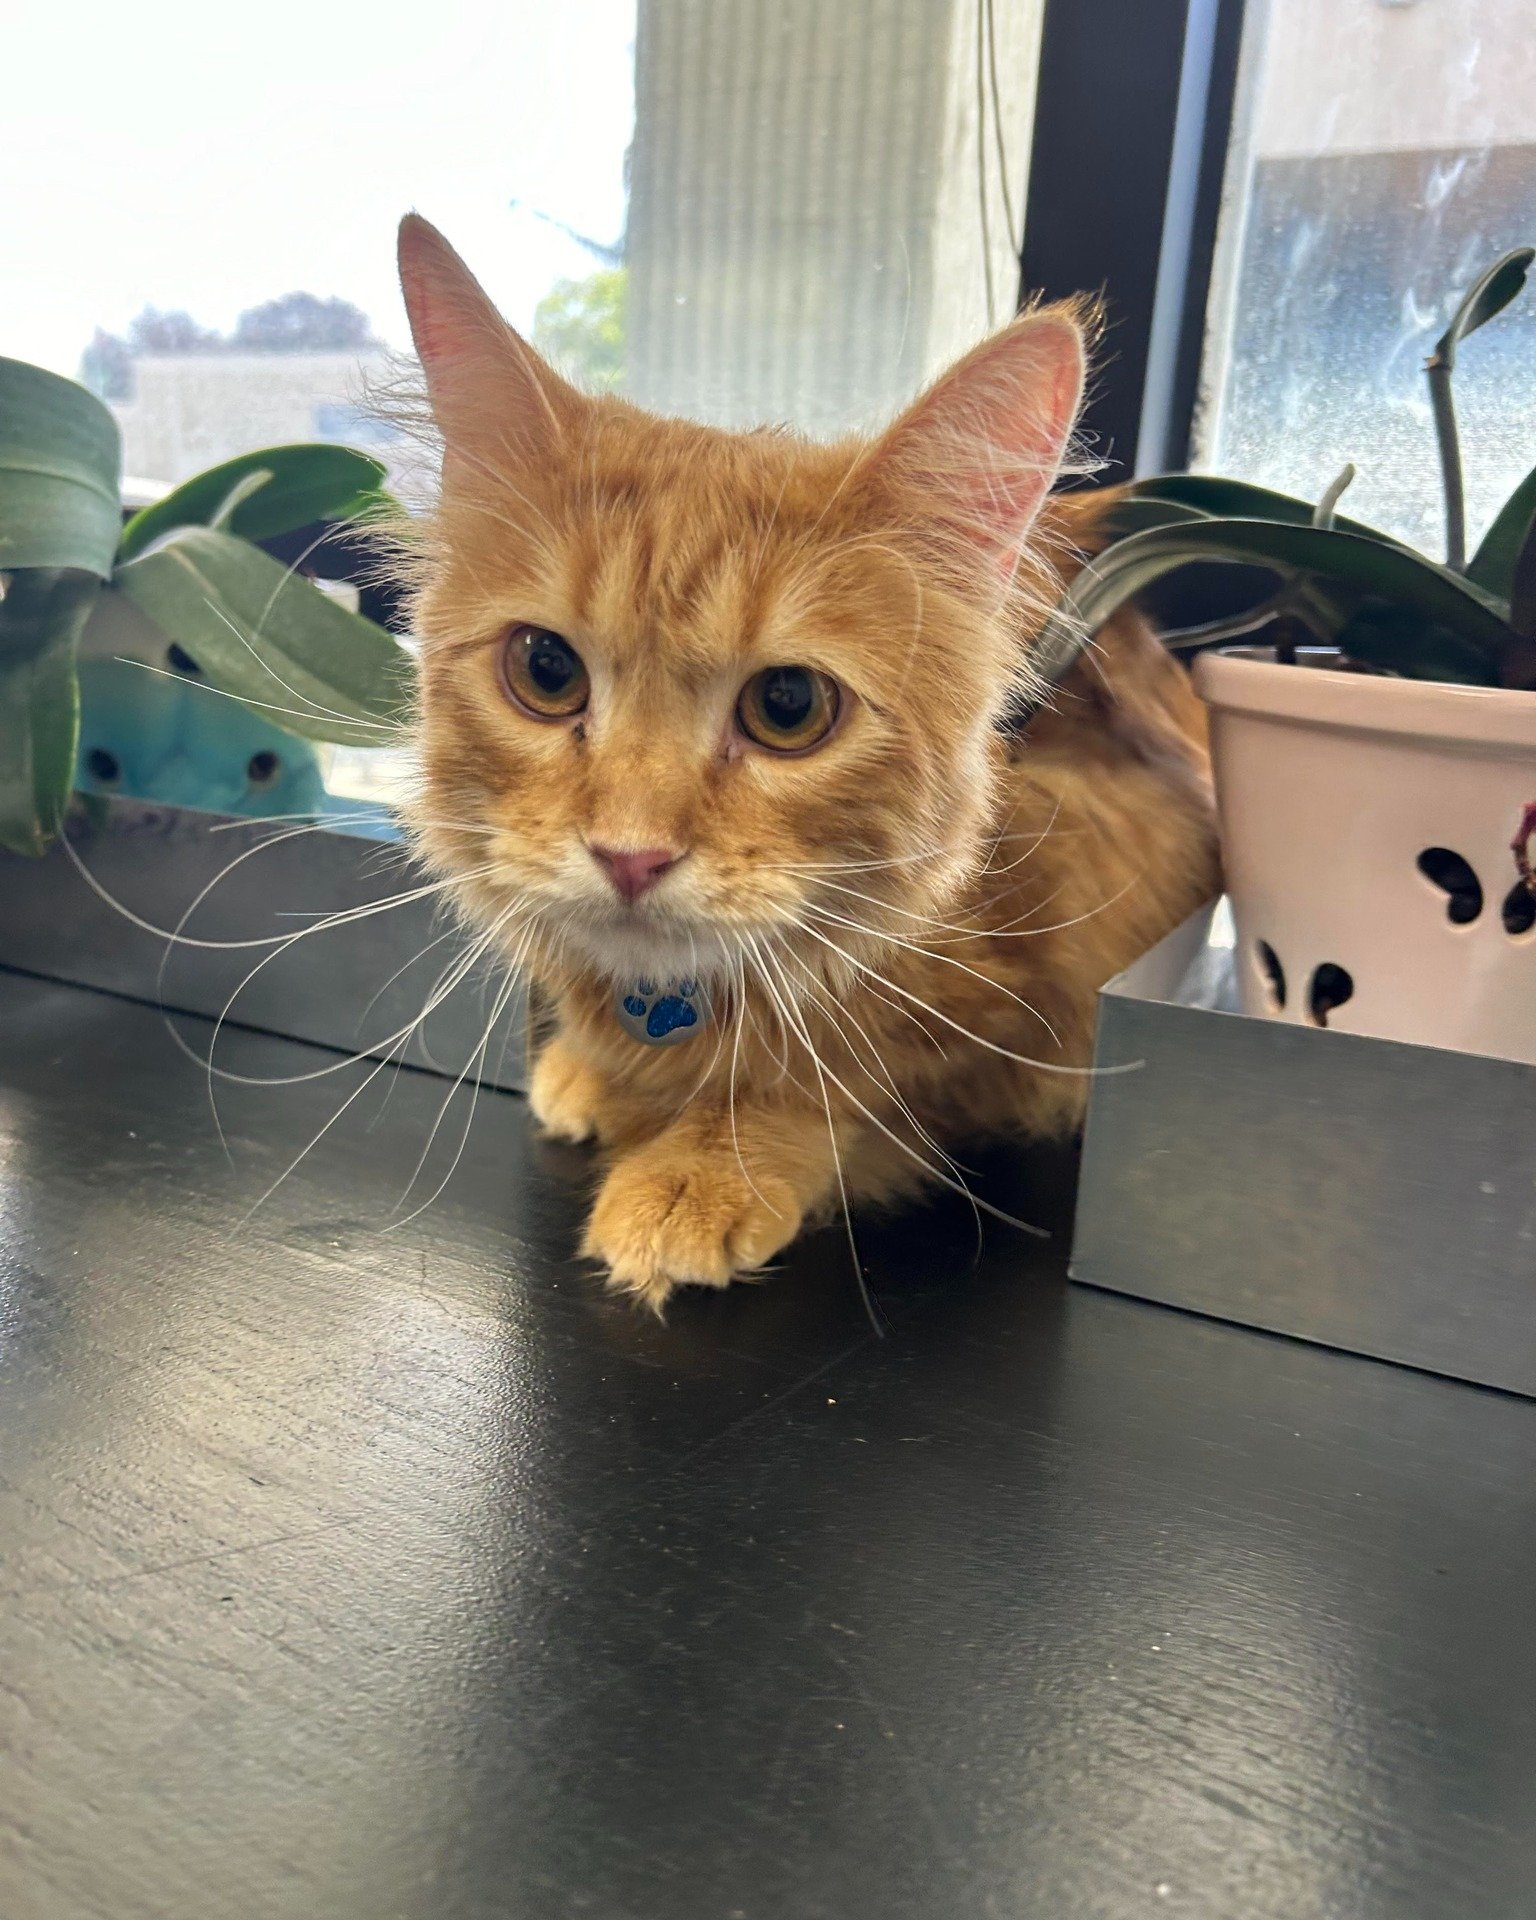 ✨Pet of the Week✨

🐾 This 9-month-old orange cat stole our hearts from the moment he walked through our doors. 💙 Leo has been a cherished patient since he was just a tiny kitten, and we've had the pleasure of watching him grow into the sweet, energ